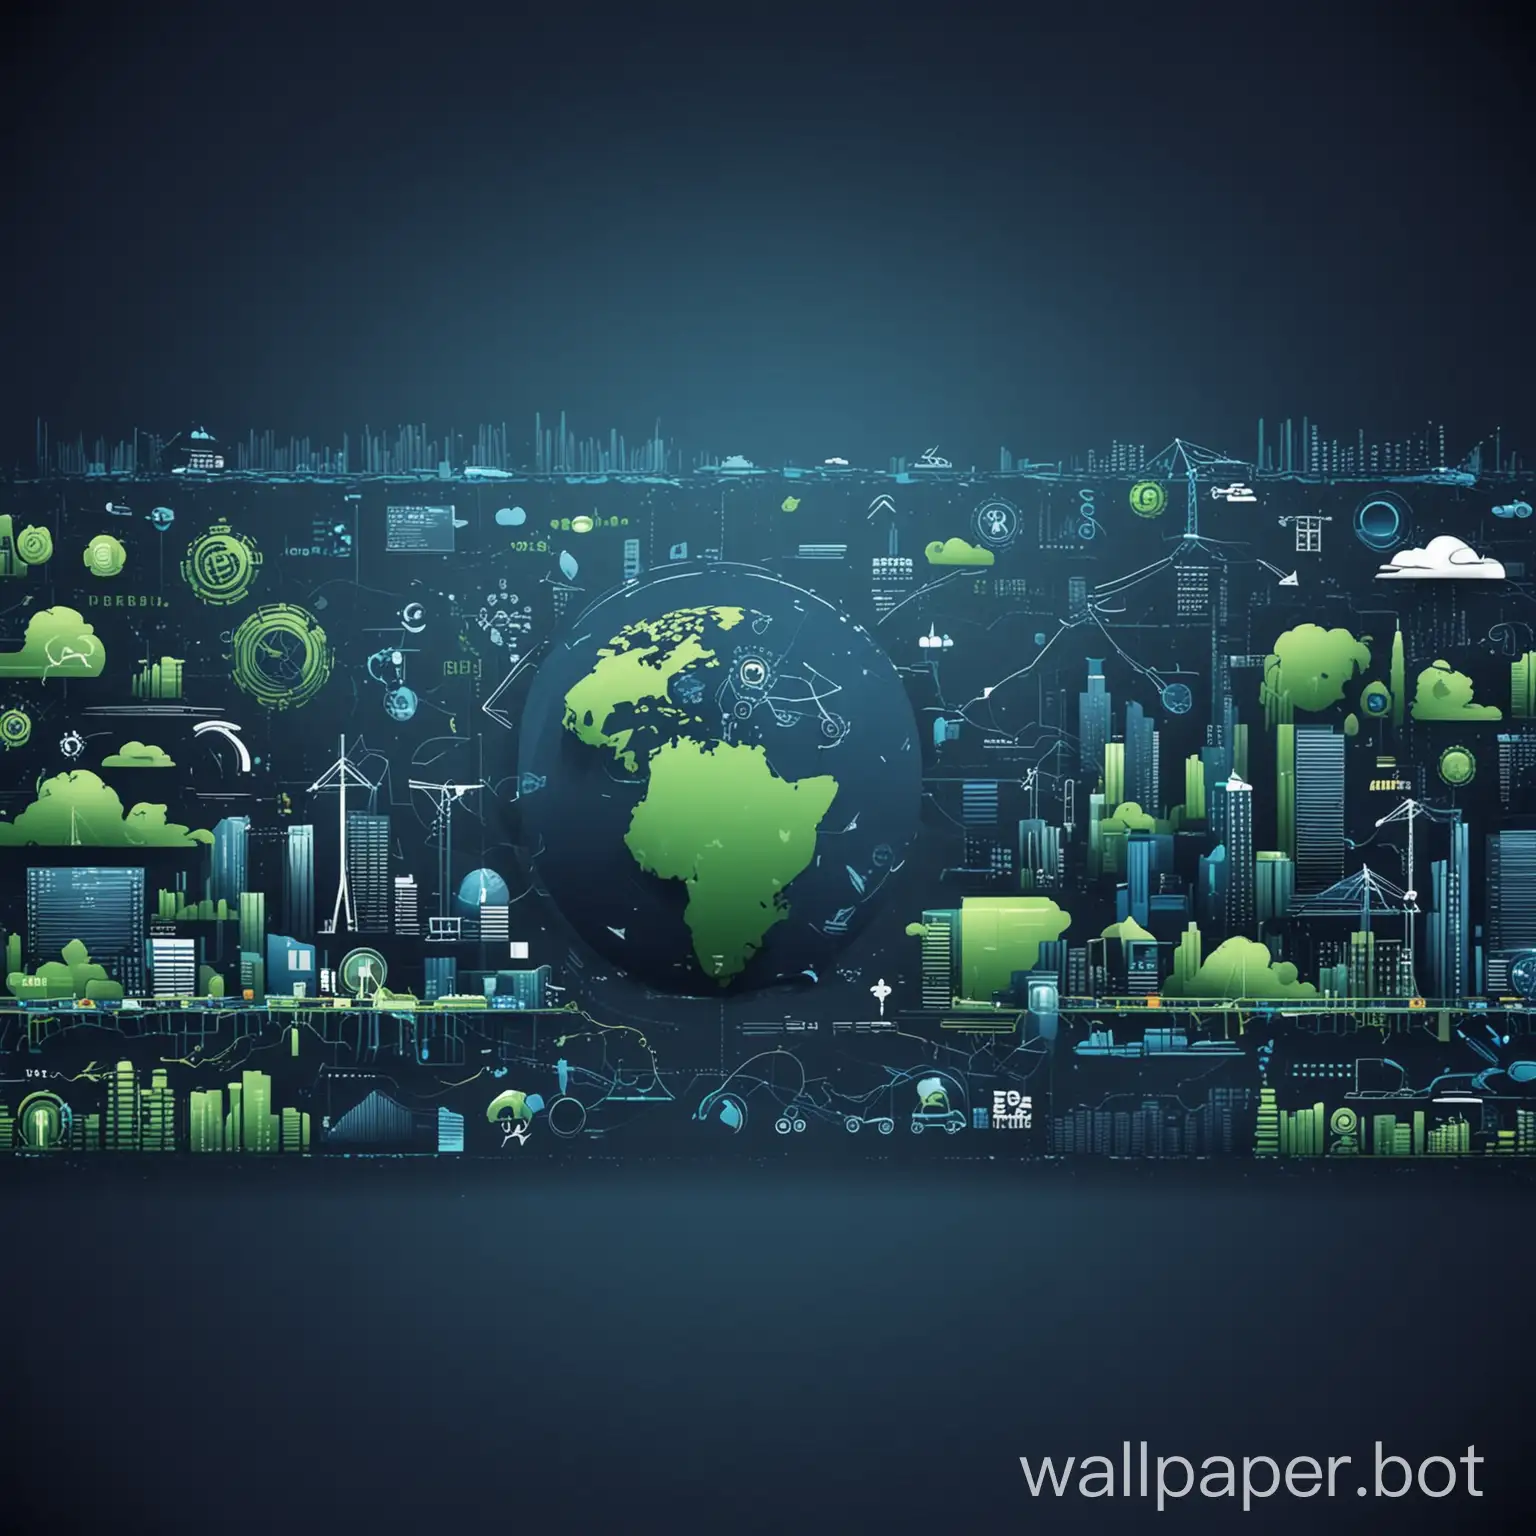 illustration wallpaper for business presentation background using dark blue theme, related to green economy, digitalization, and infrastructure